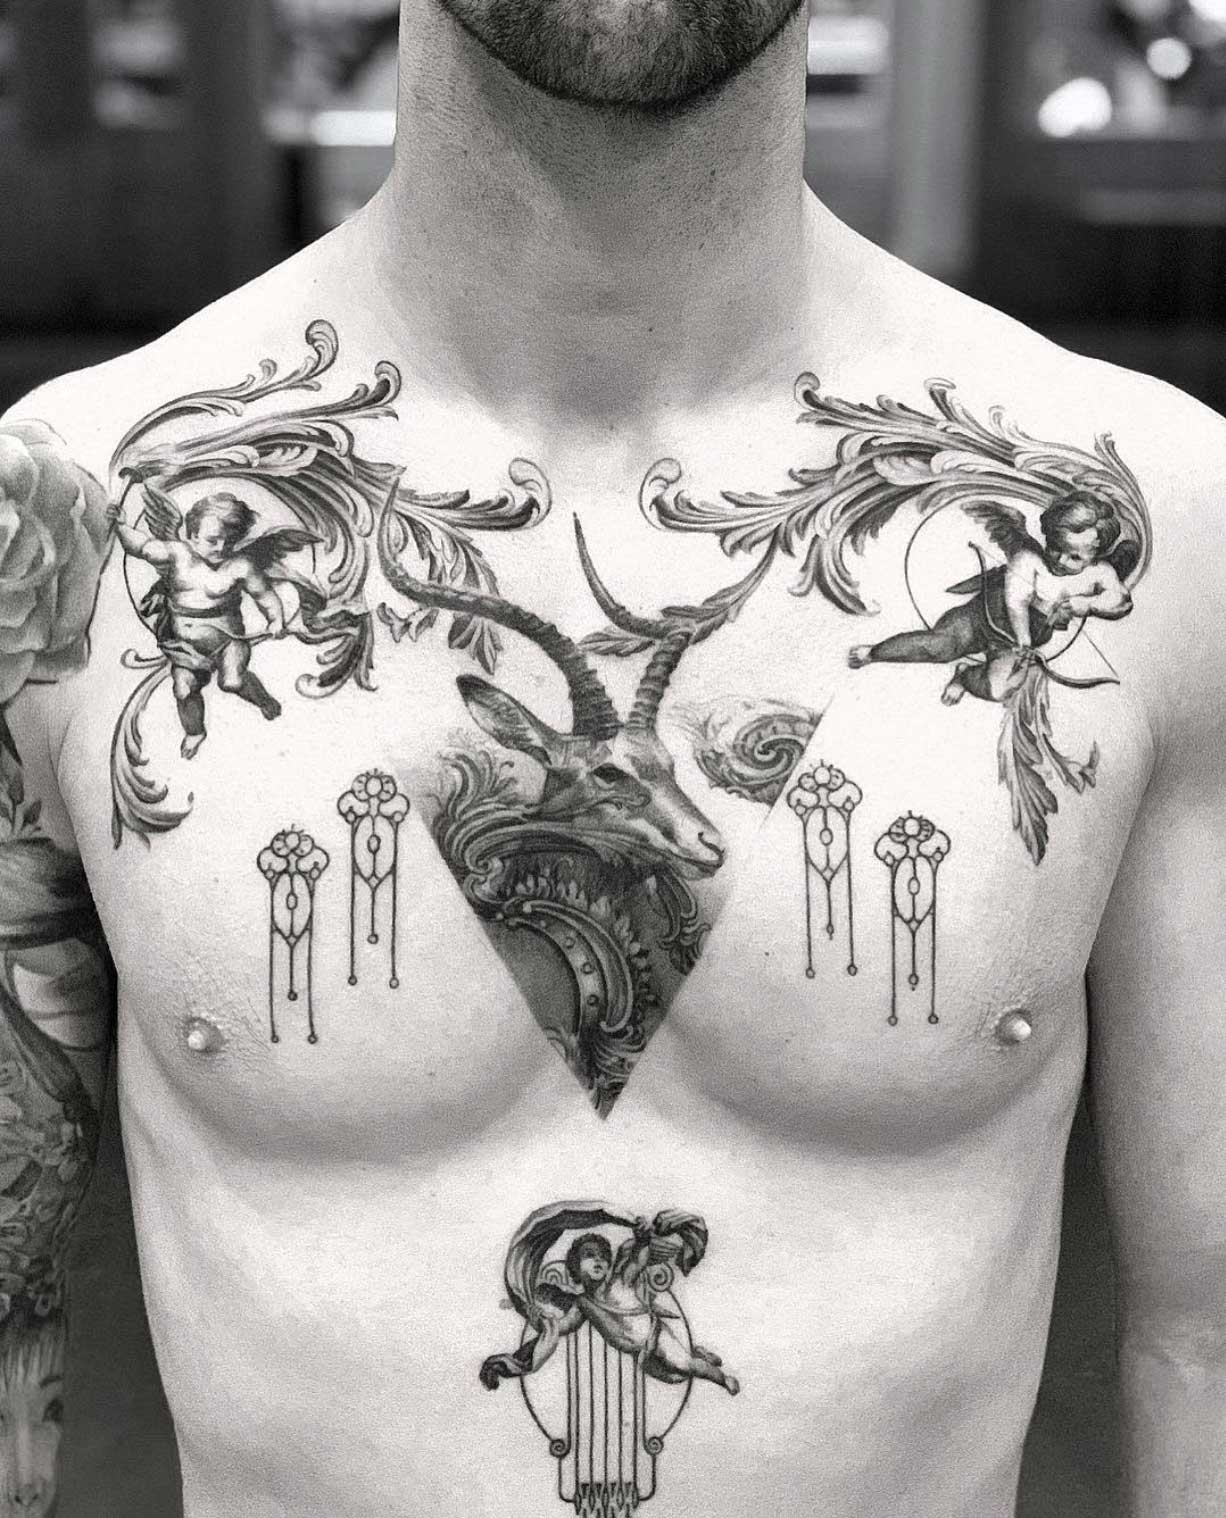 40 Men's Tattoos That Are Anything But Basic - TattooBlend